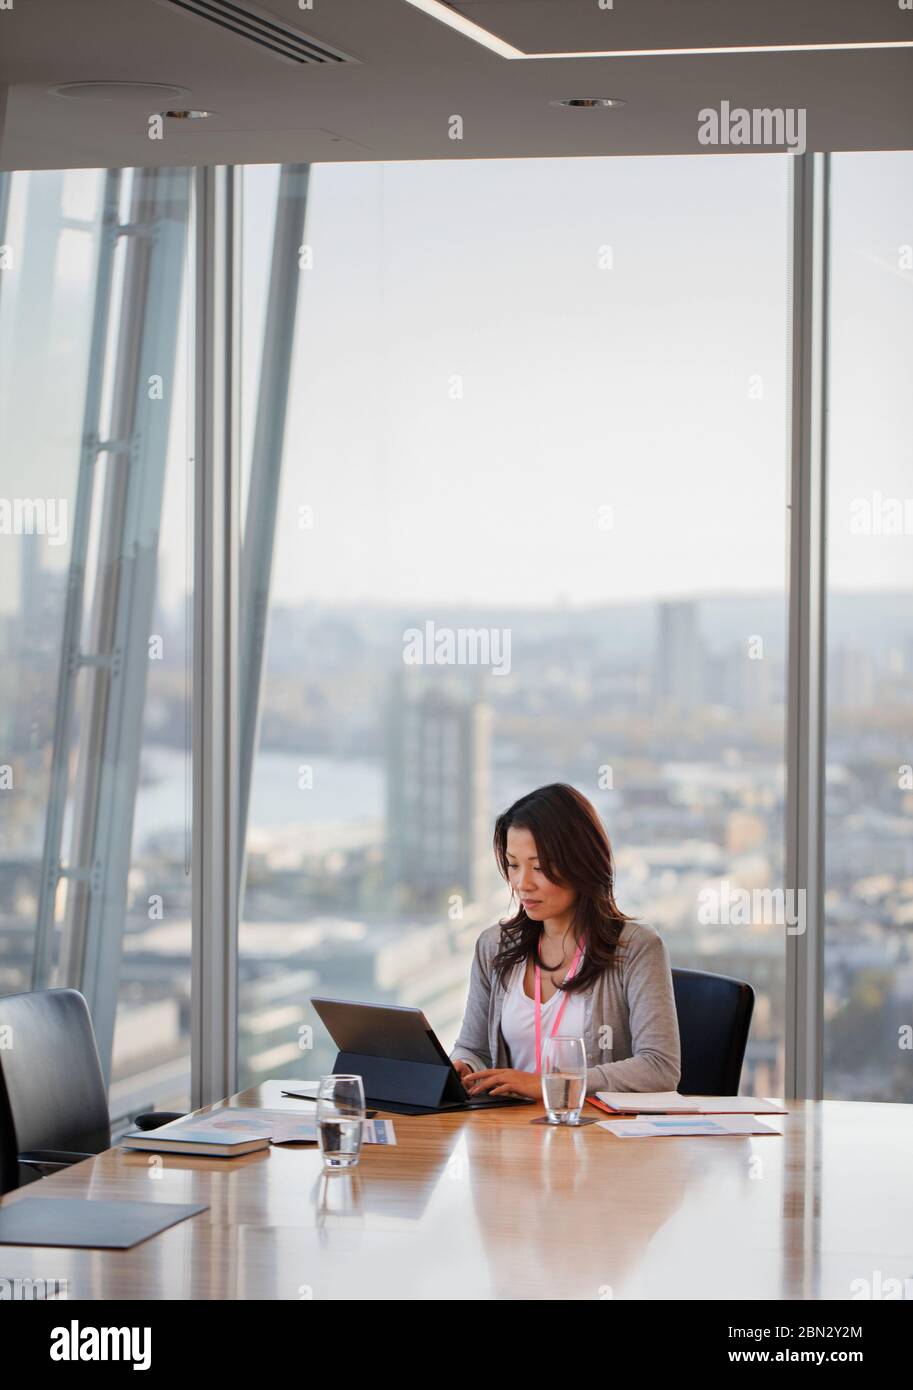 Businesswoman using digital tablet in urban highrise conference room Stock Photo